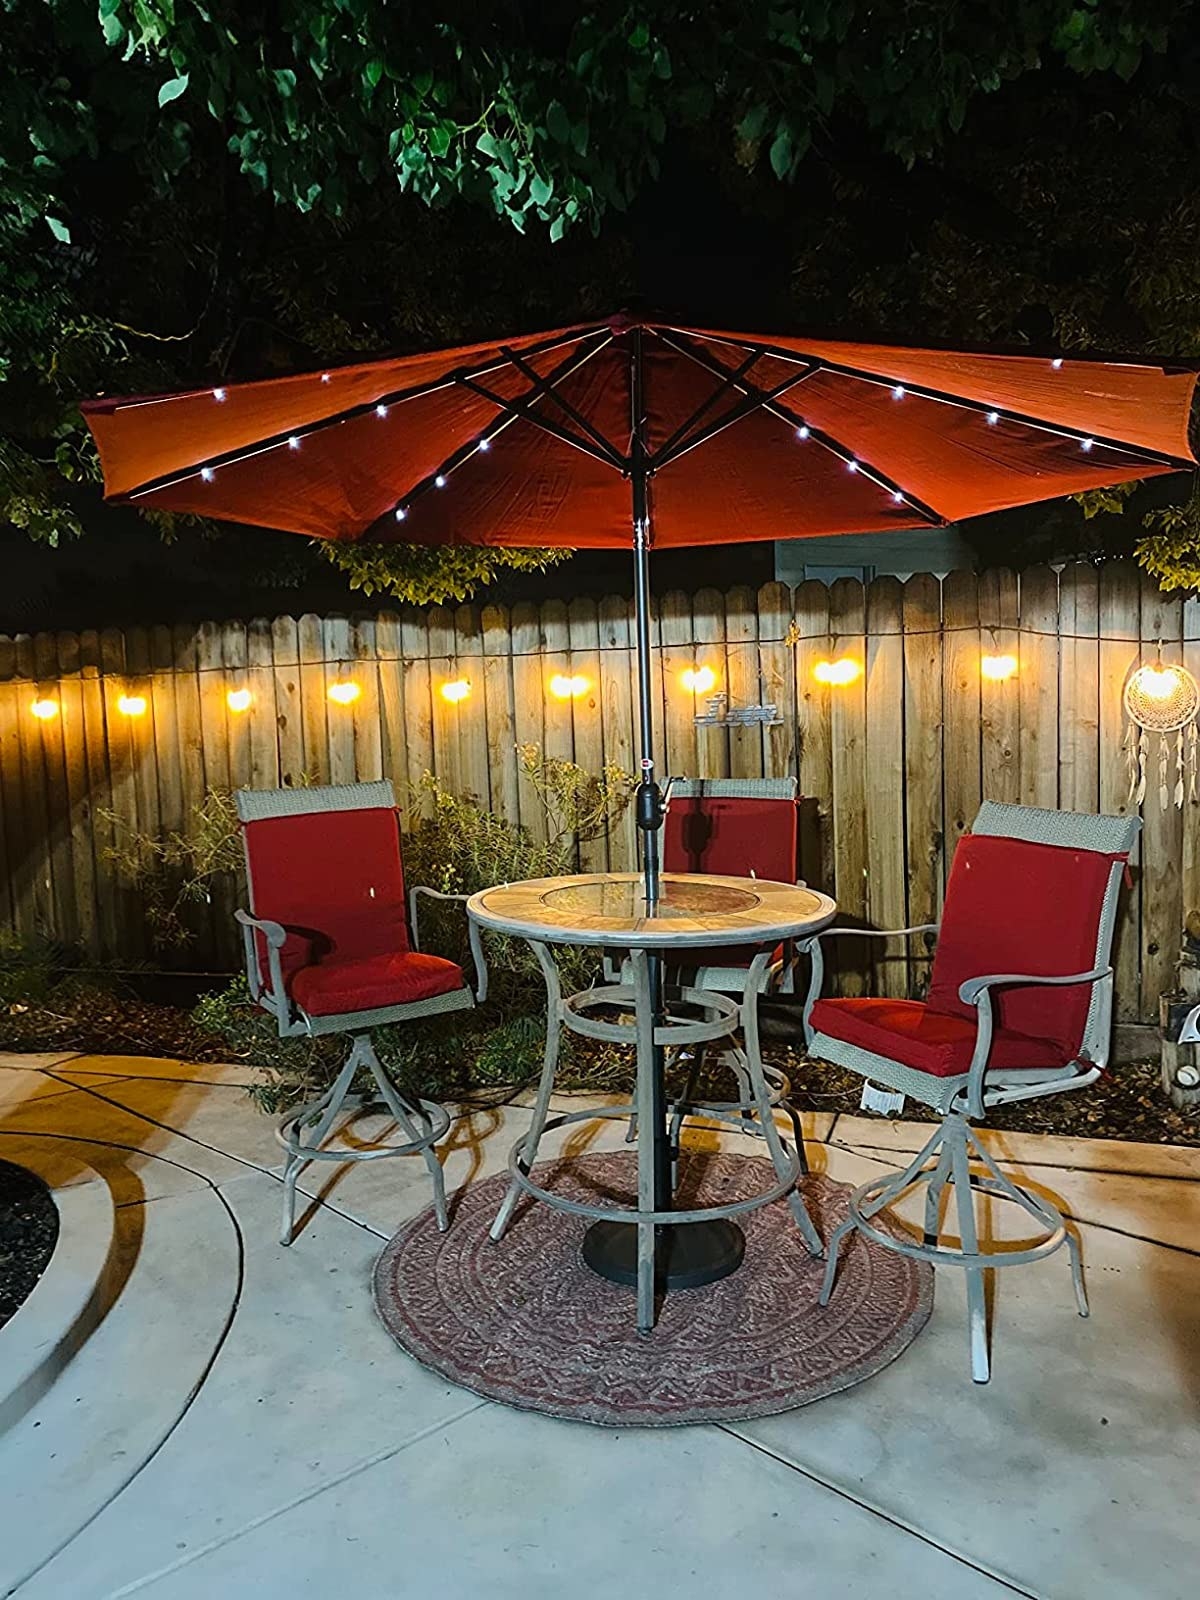 Reviewer image of their outdoor seating area with the umbrella